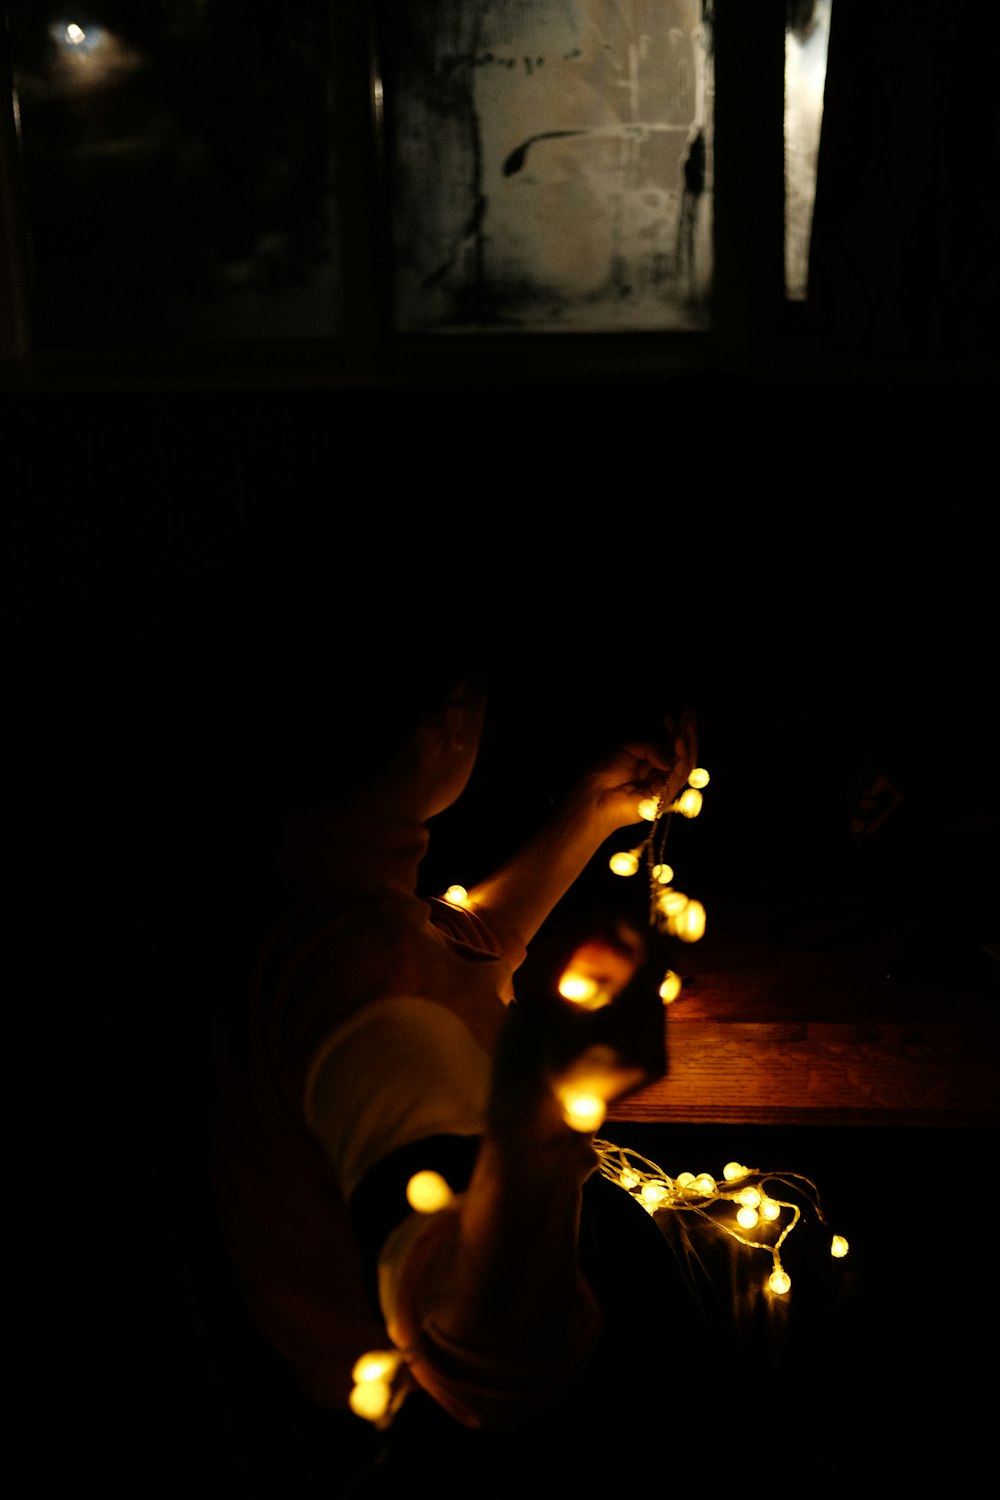 a person sitting down with some lights on their feet